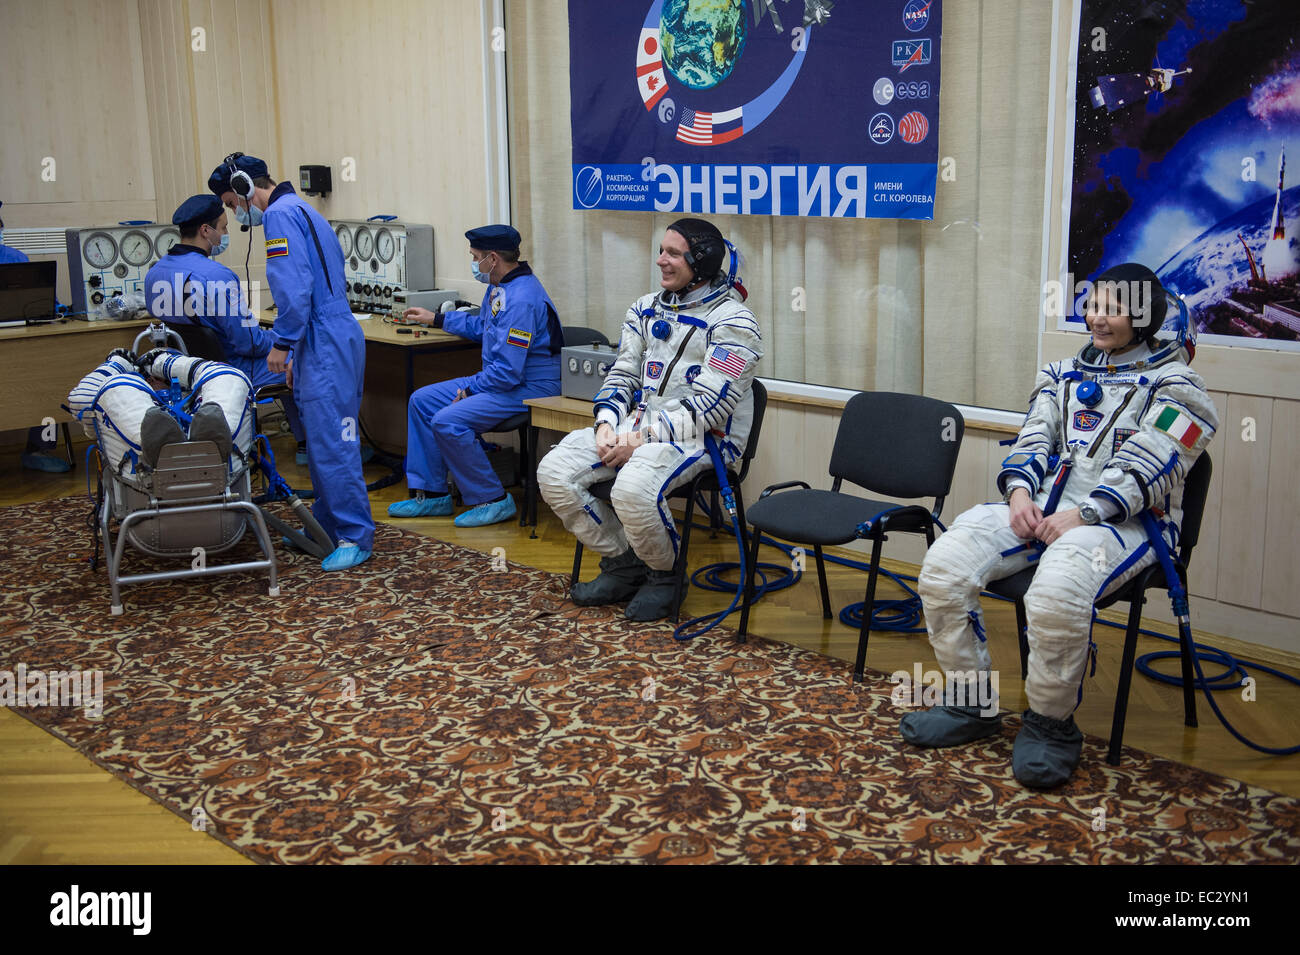 Expedition 42 Flight Engineers Terry Virts of NASA and Samantha Cristoforetti of the European Space Agency (ESA) wait while crewmate and Soyuz Commander, Anton Shkaplerov of the Russian Federal Space Agency (Roscosmos), has his Sokol suit pressure checked on Sunday, Nov. 23, 2014 at Building 254 in the Baikonur Cosmodrome in Baikonur, Kazakhstan. Launch of the Soyuz rocket is scheduled for the early hours of Nov. 24 and will carry Shkaplerov, Virts, and Cristoforetti into orbit to begin their five and a half month mission on the International Space Station. Stock Photo